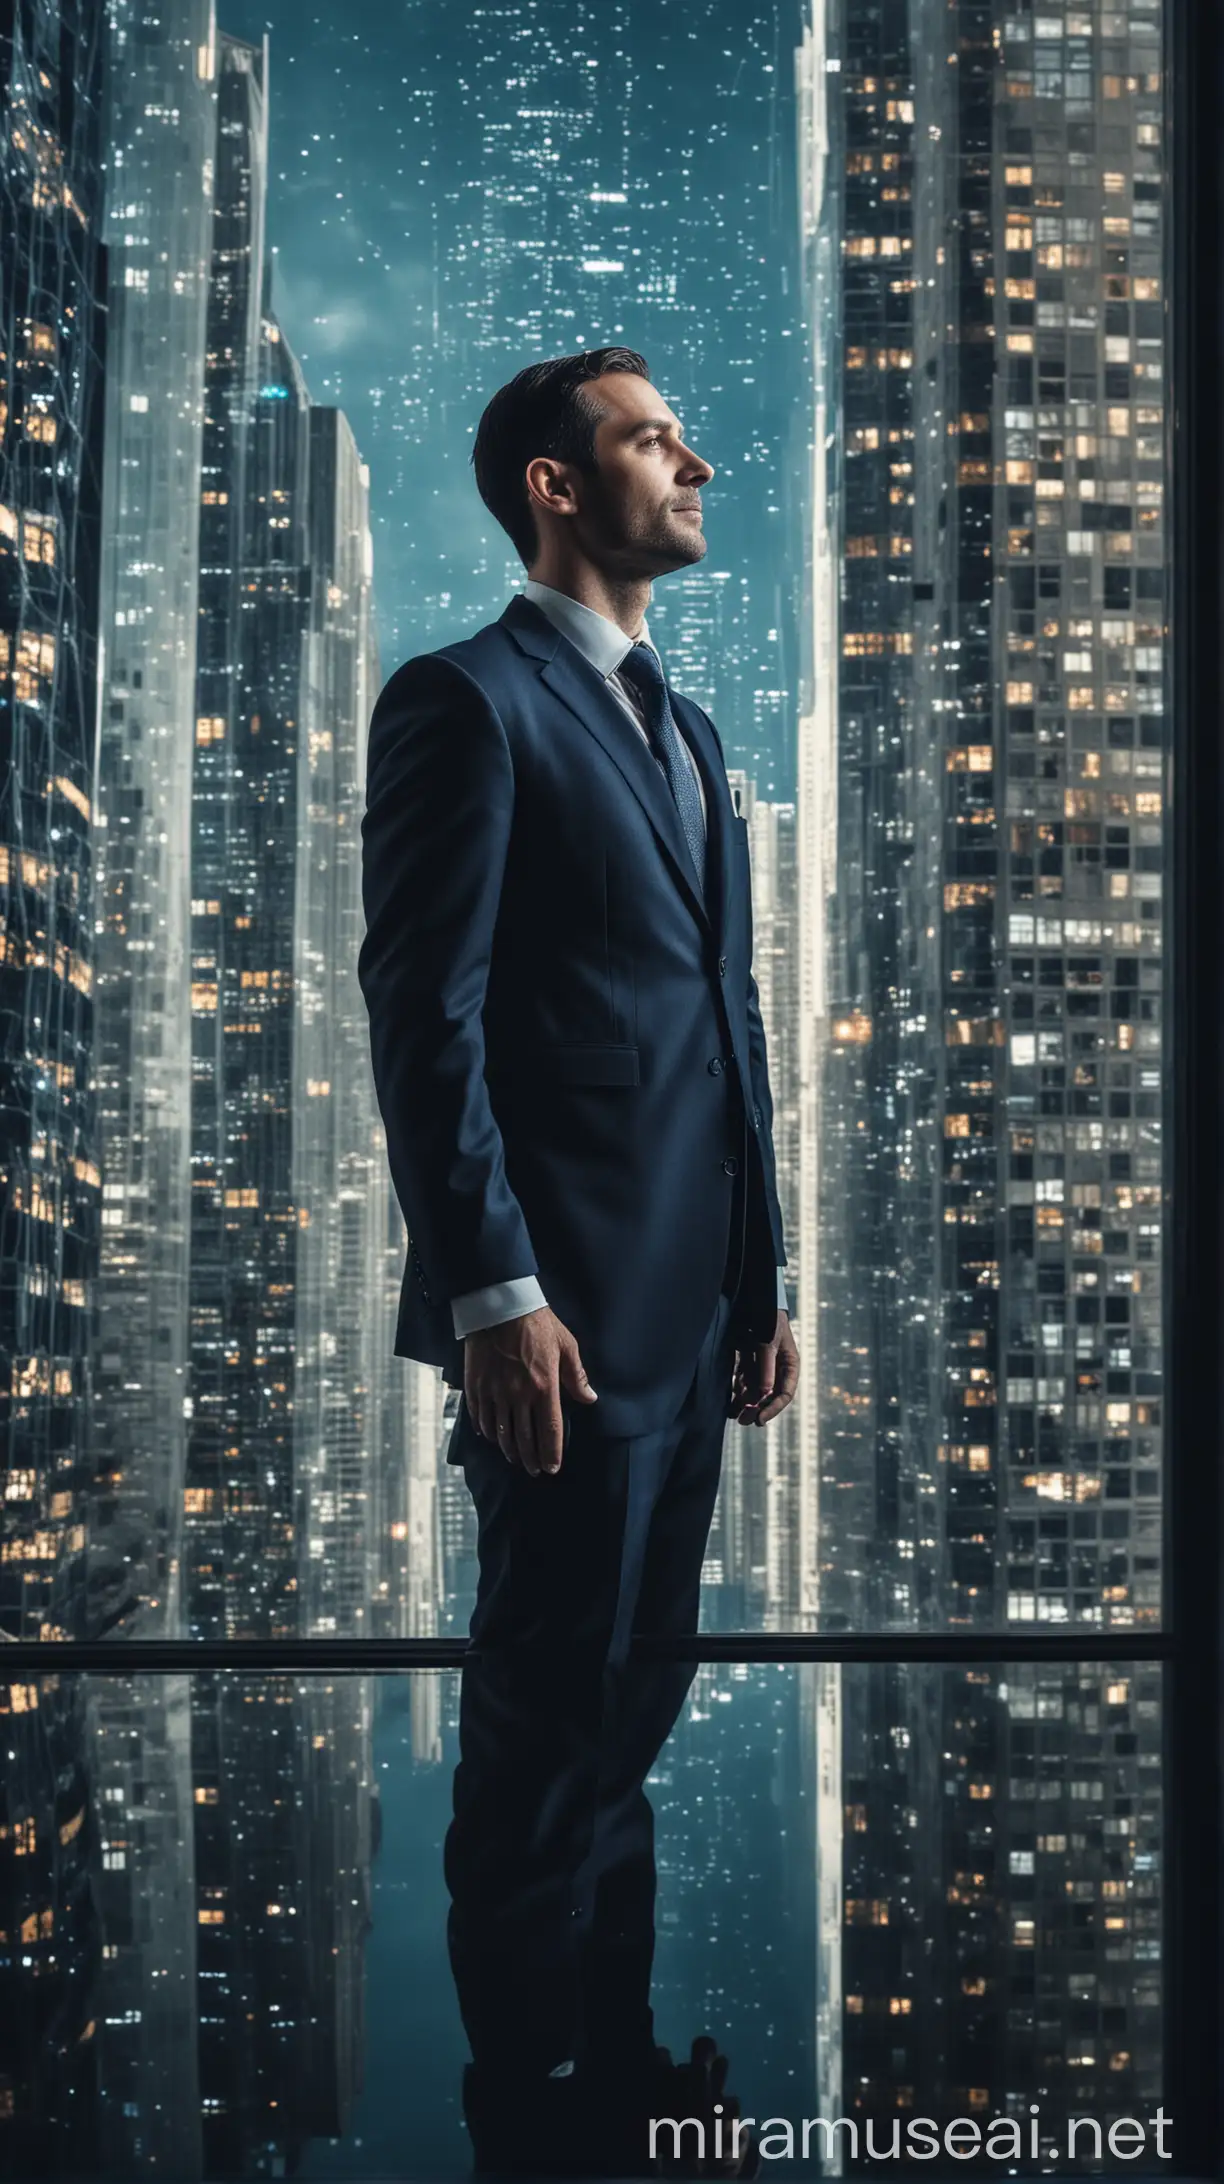 generate a film photo with reflection. of a an 40 year old man in a suit looking into the future and skyscapers. He is happy the future looks bright. window reflection. He is looking into a dark blue technological universe.
